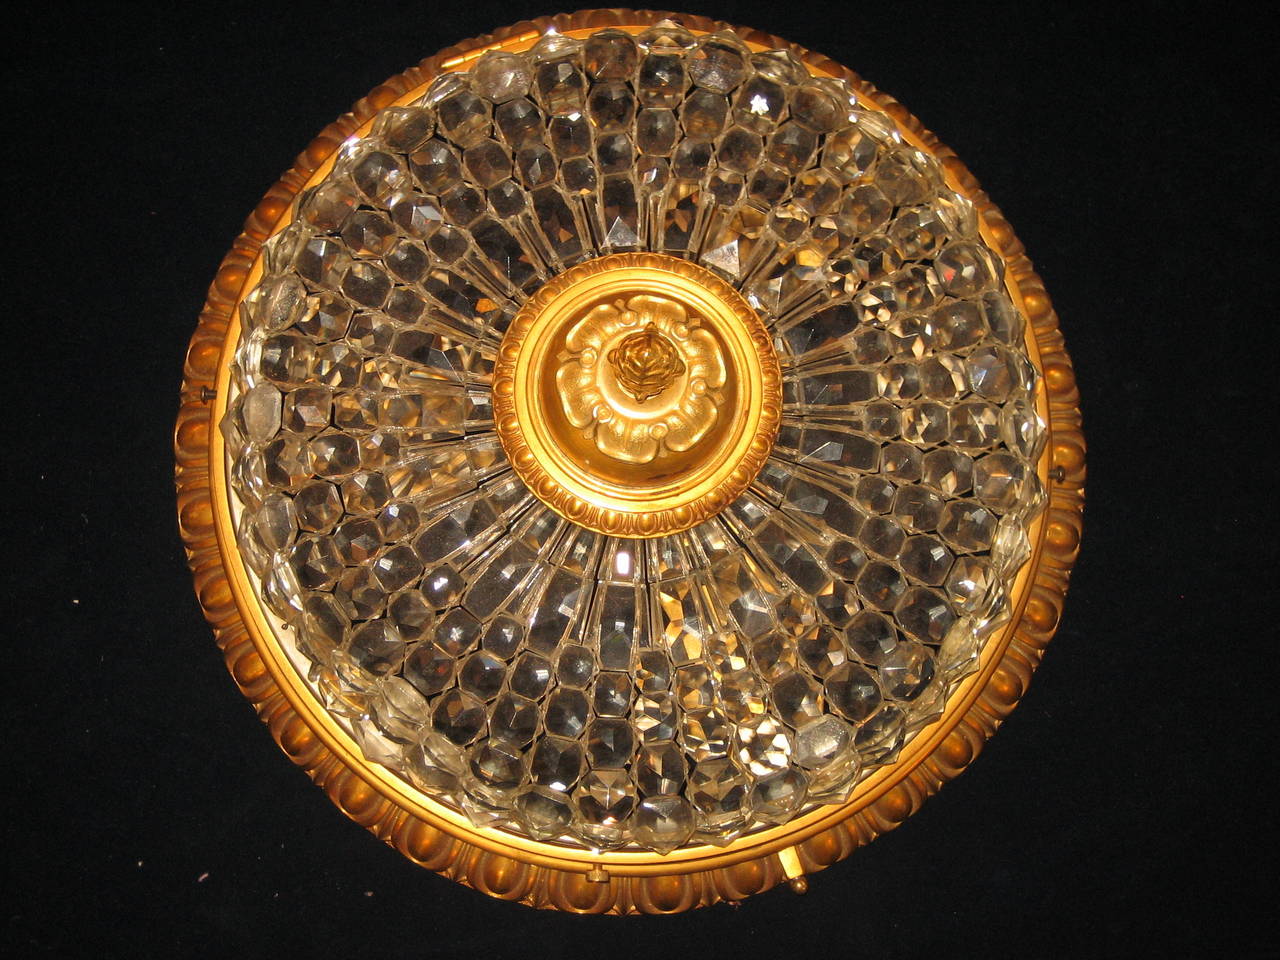 A fine and unique antique French Louis XVI gilt bronze and cut crystal ceiling fixture.